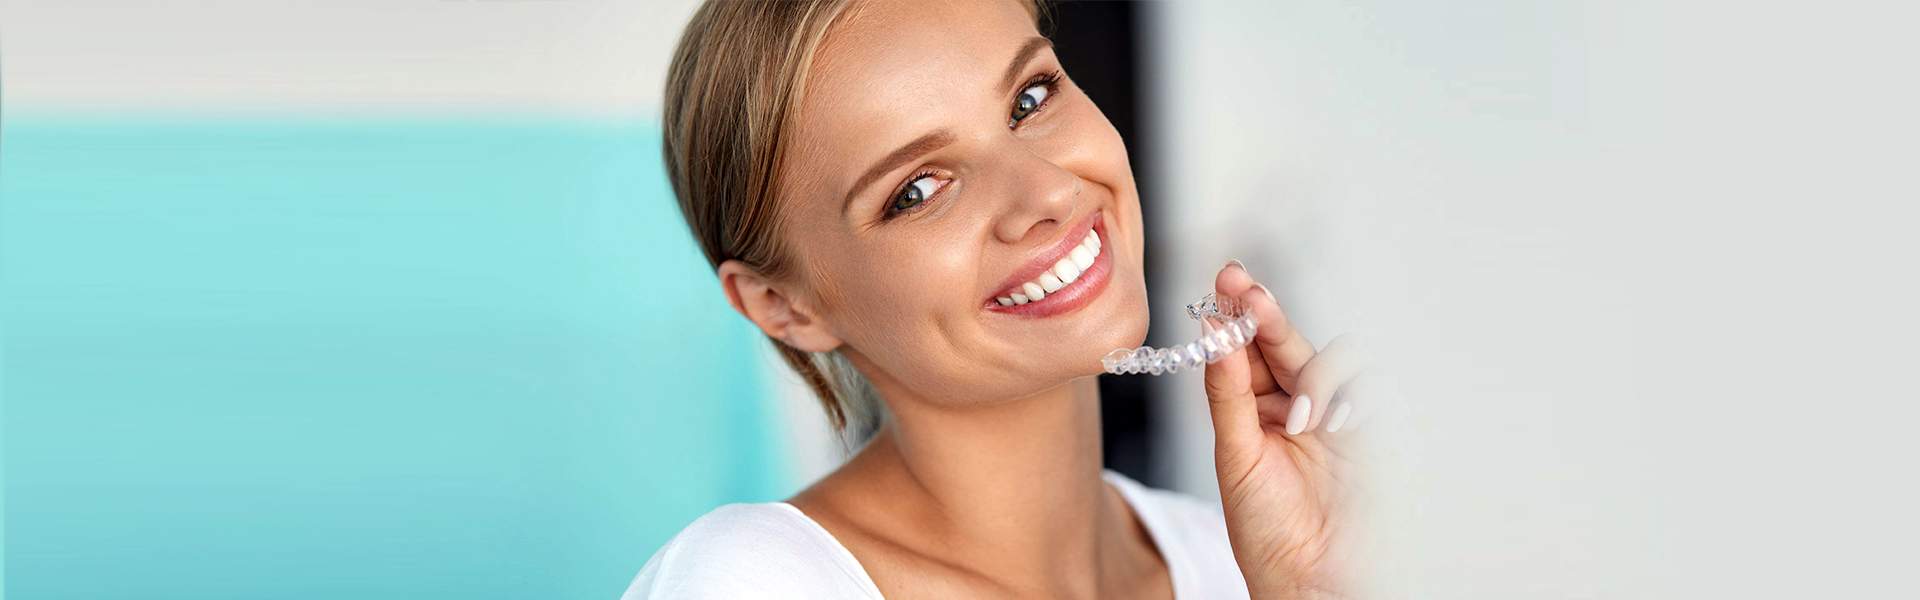 How Does Invisalign Treatment Impact Your Life?